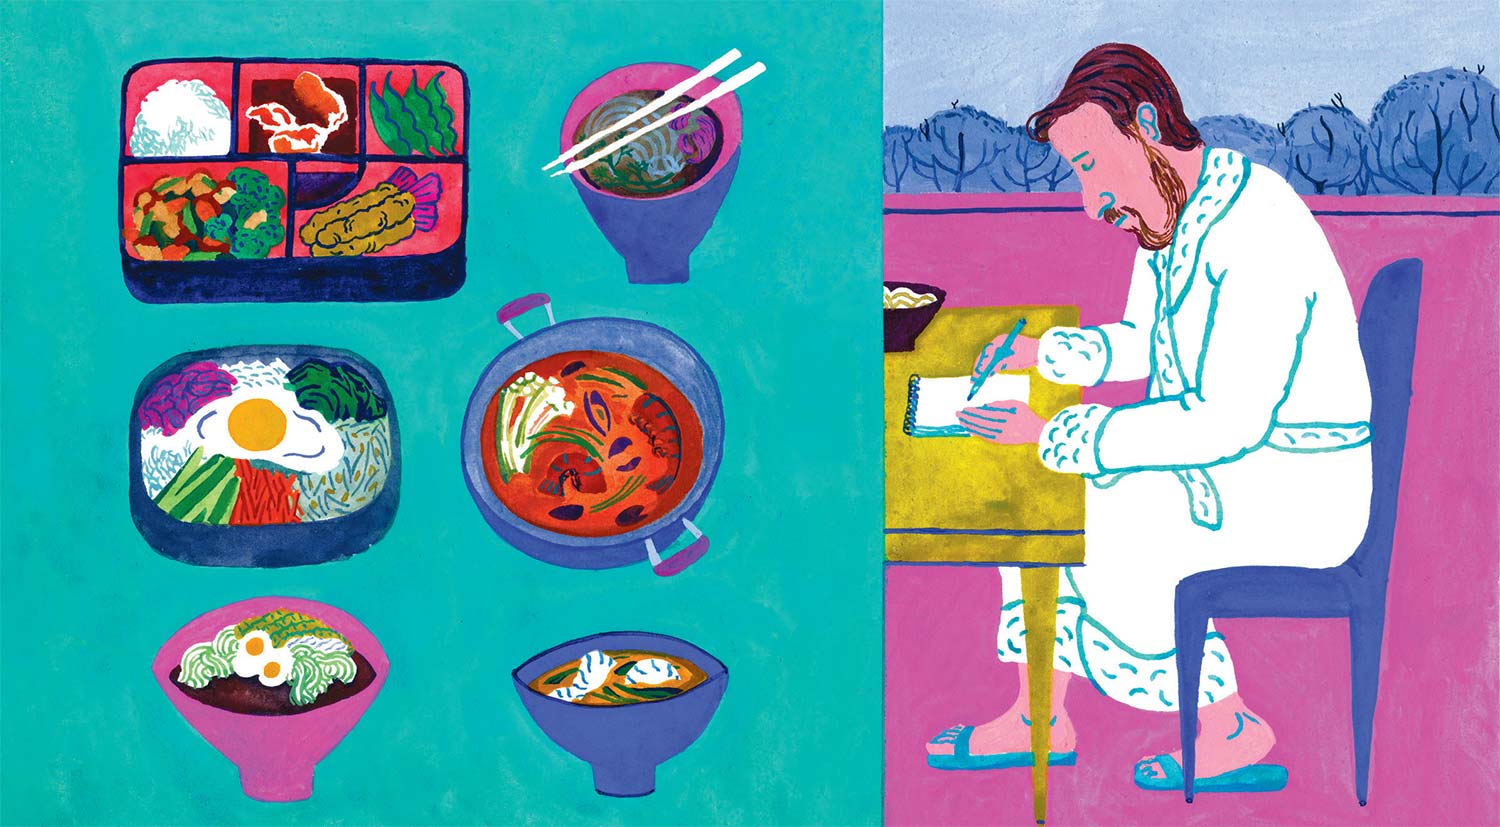 Spa Castle in College Point offers Korean Cuisine. Illustrations by Miguel Pang Ly.